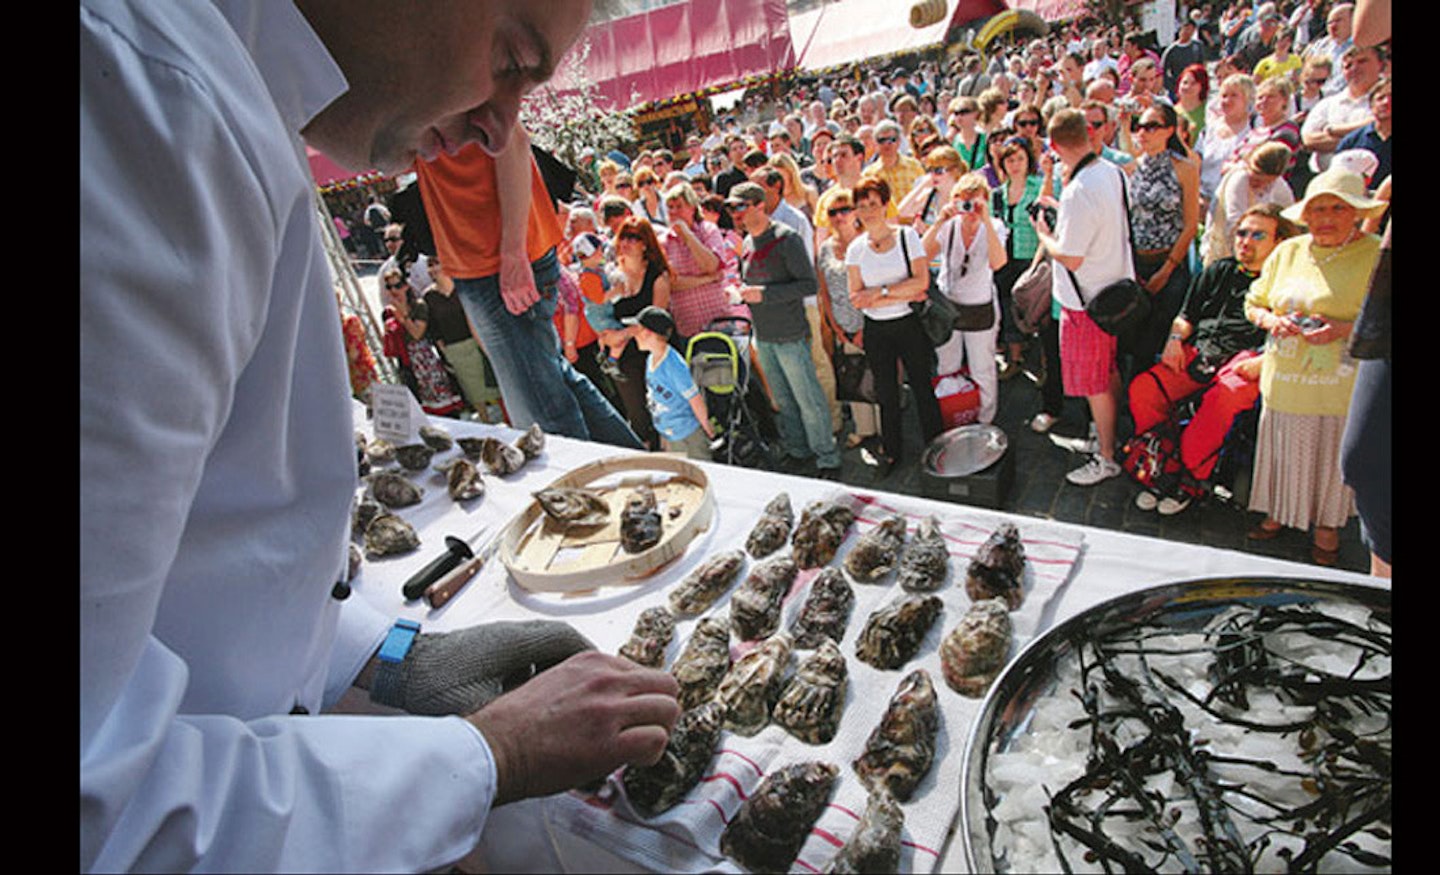 4. Galway Oyster Festival (26-29th Sept, Galway, Ireland)